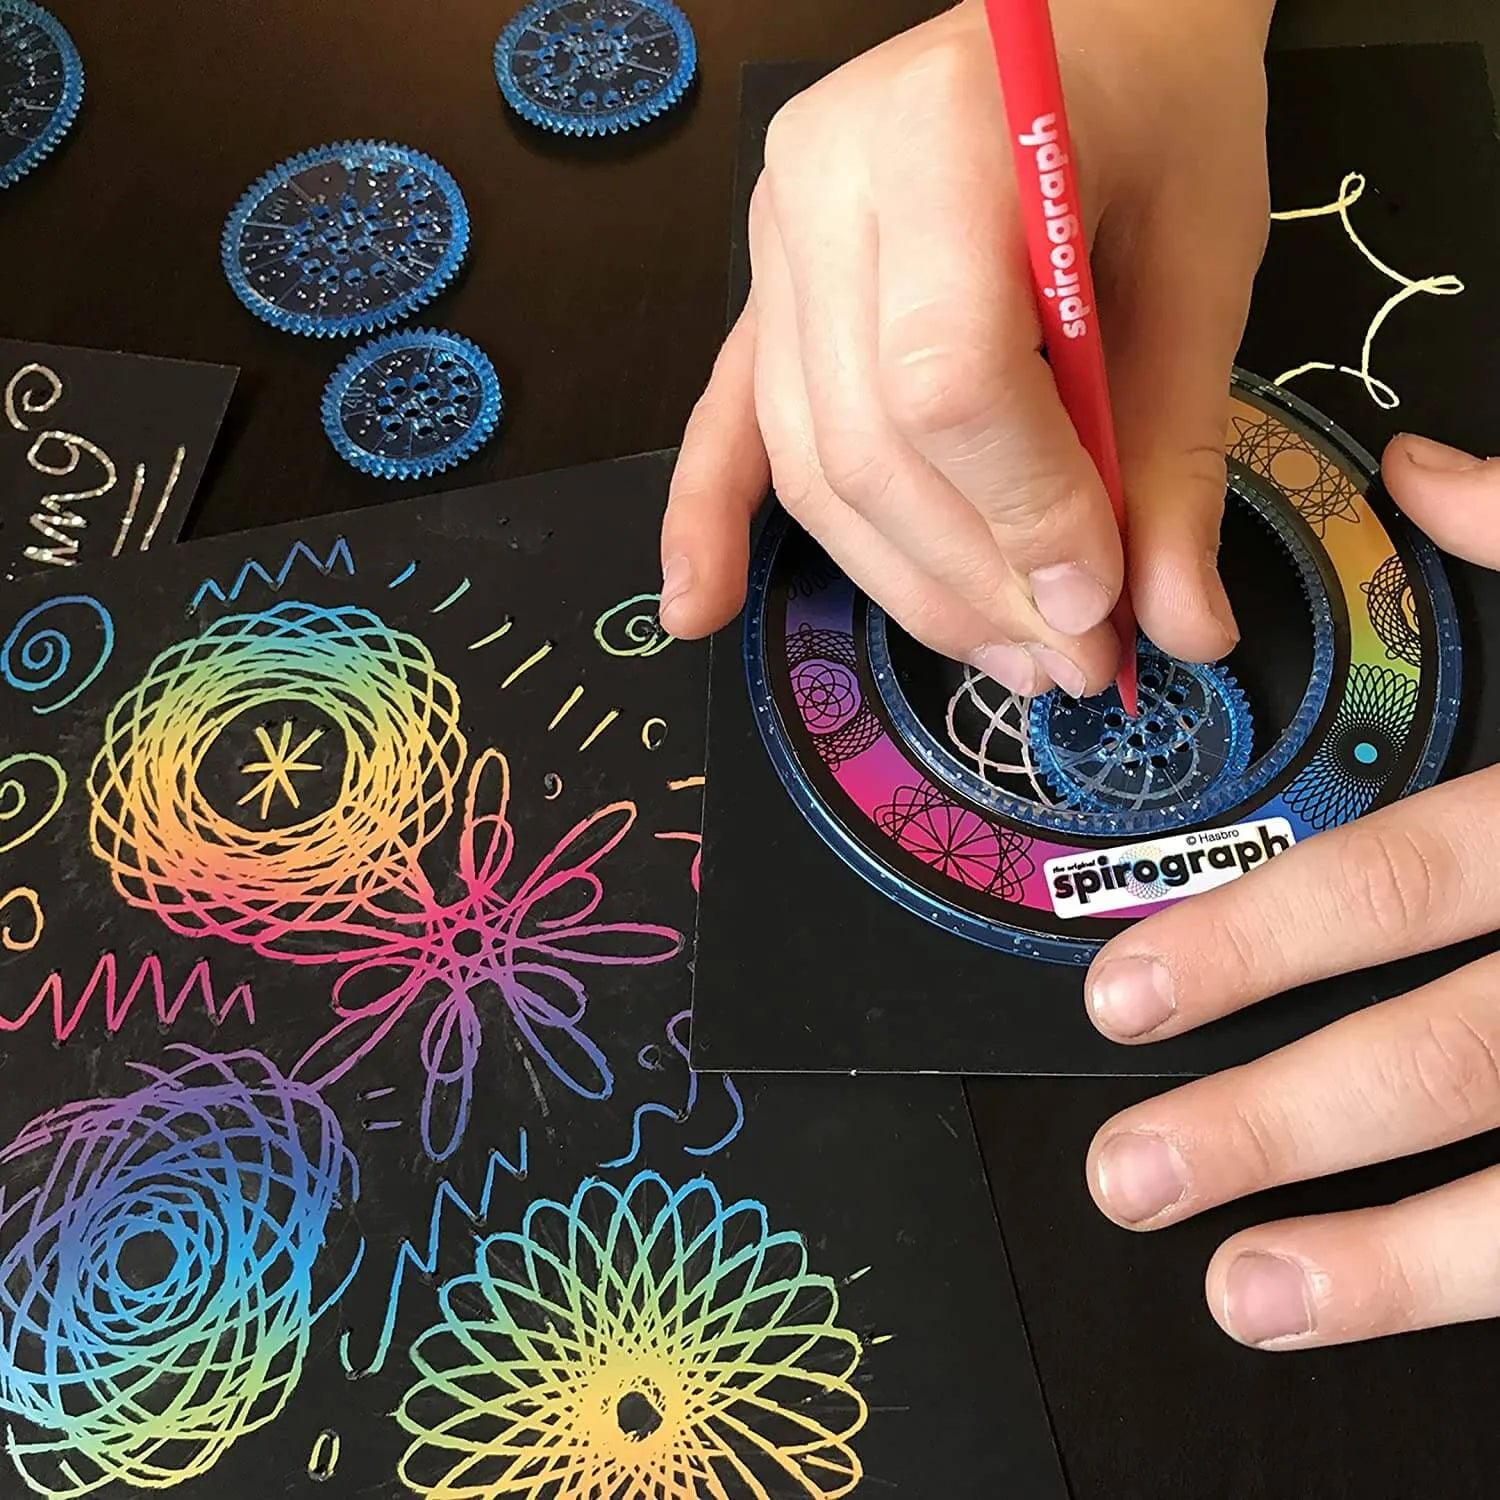 Shop Spirograph Scratch and Shimmer - Activity Kits